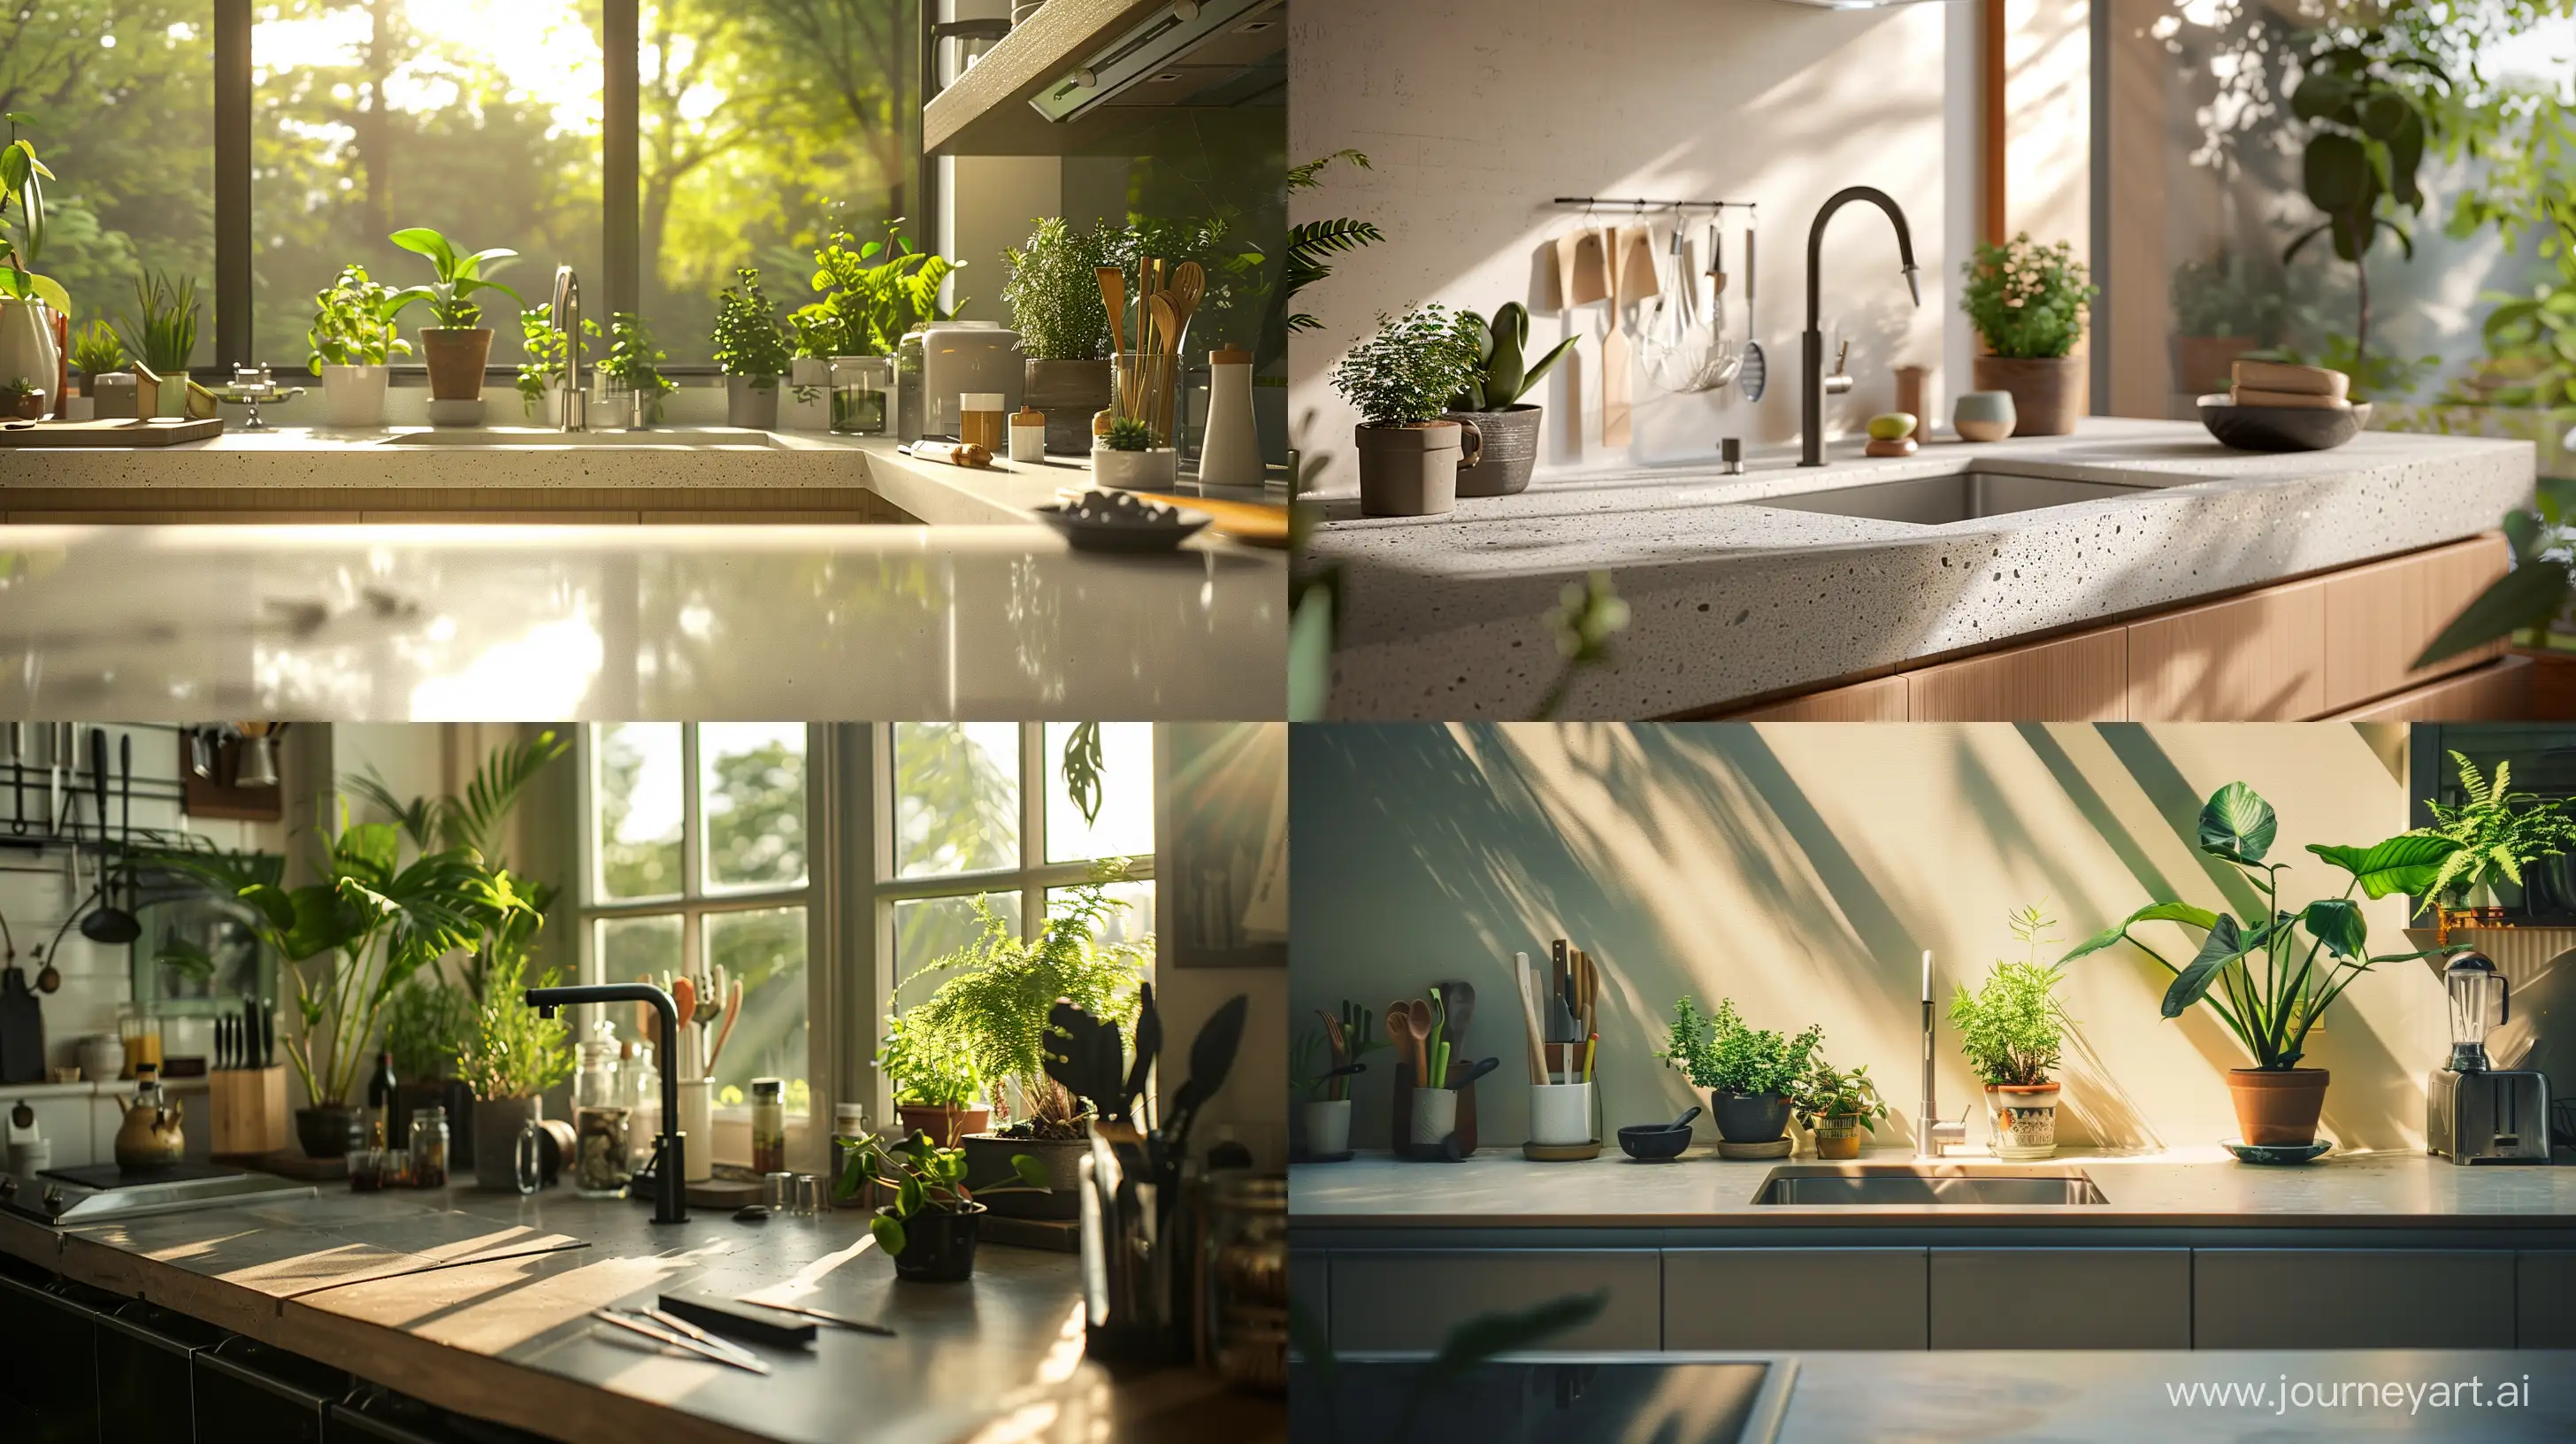 Sustainable-Elegance-CarbonNeutral-Countertops-in-Modern-Kitchen-Bathed-in-Natural-Light